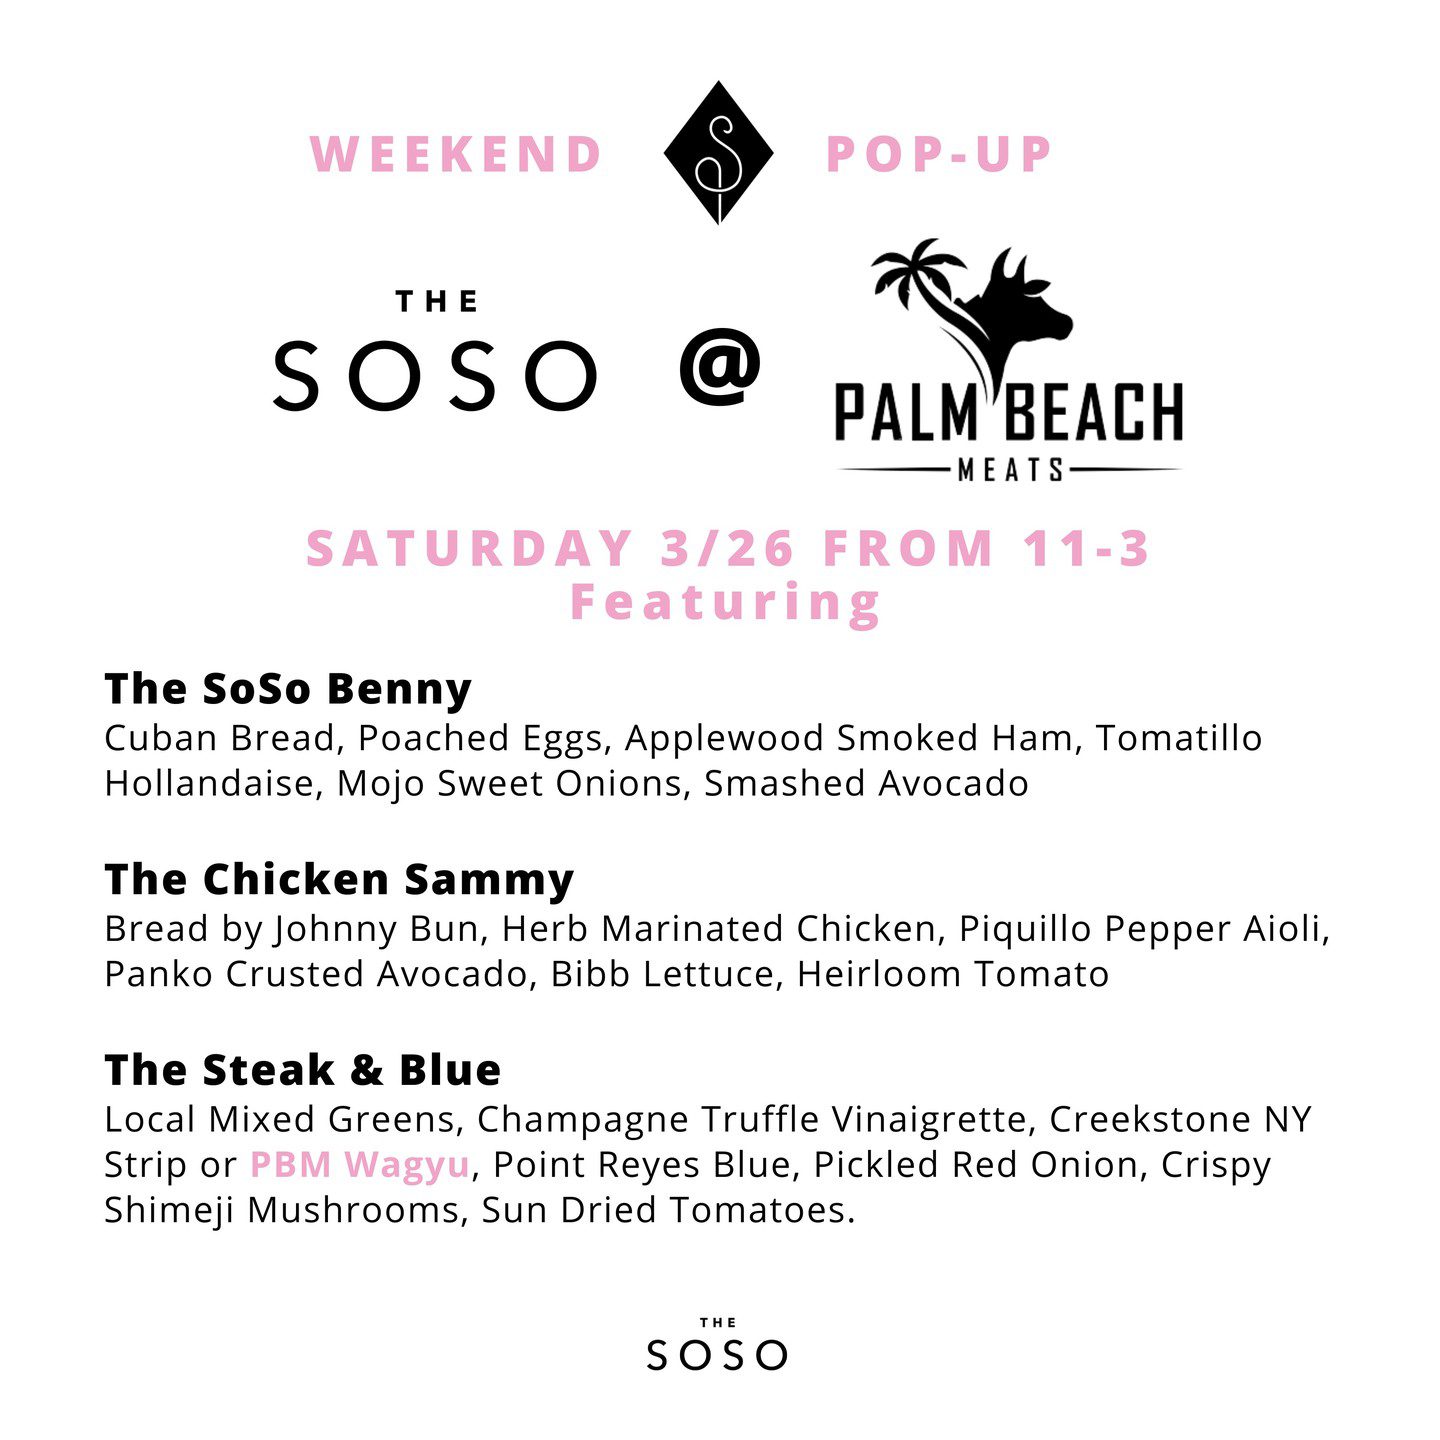 We're popping up this weekend with our neighbors @palmbeachmeats. Come check out a sneak preview of our menu Saturday 3/26 from 11-3!
.
.
.